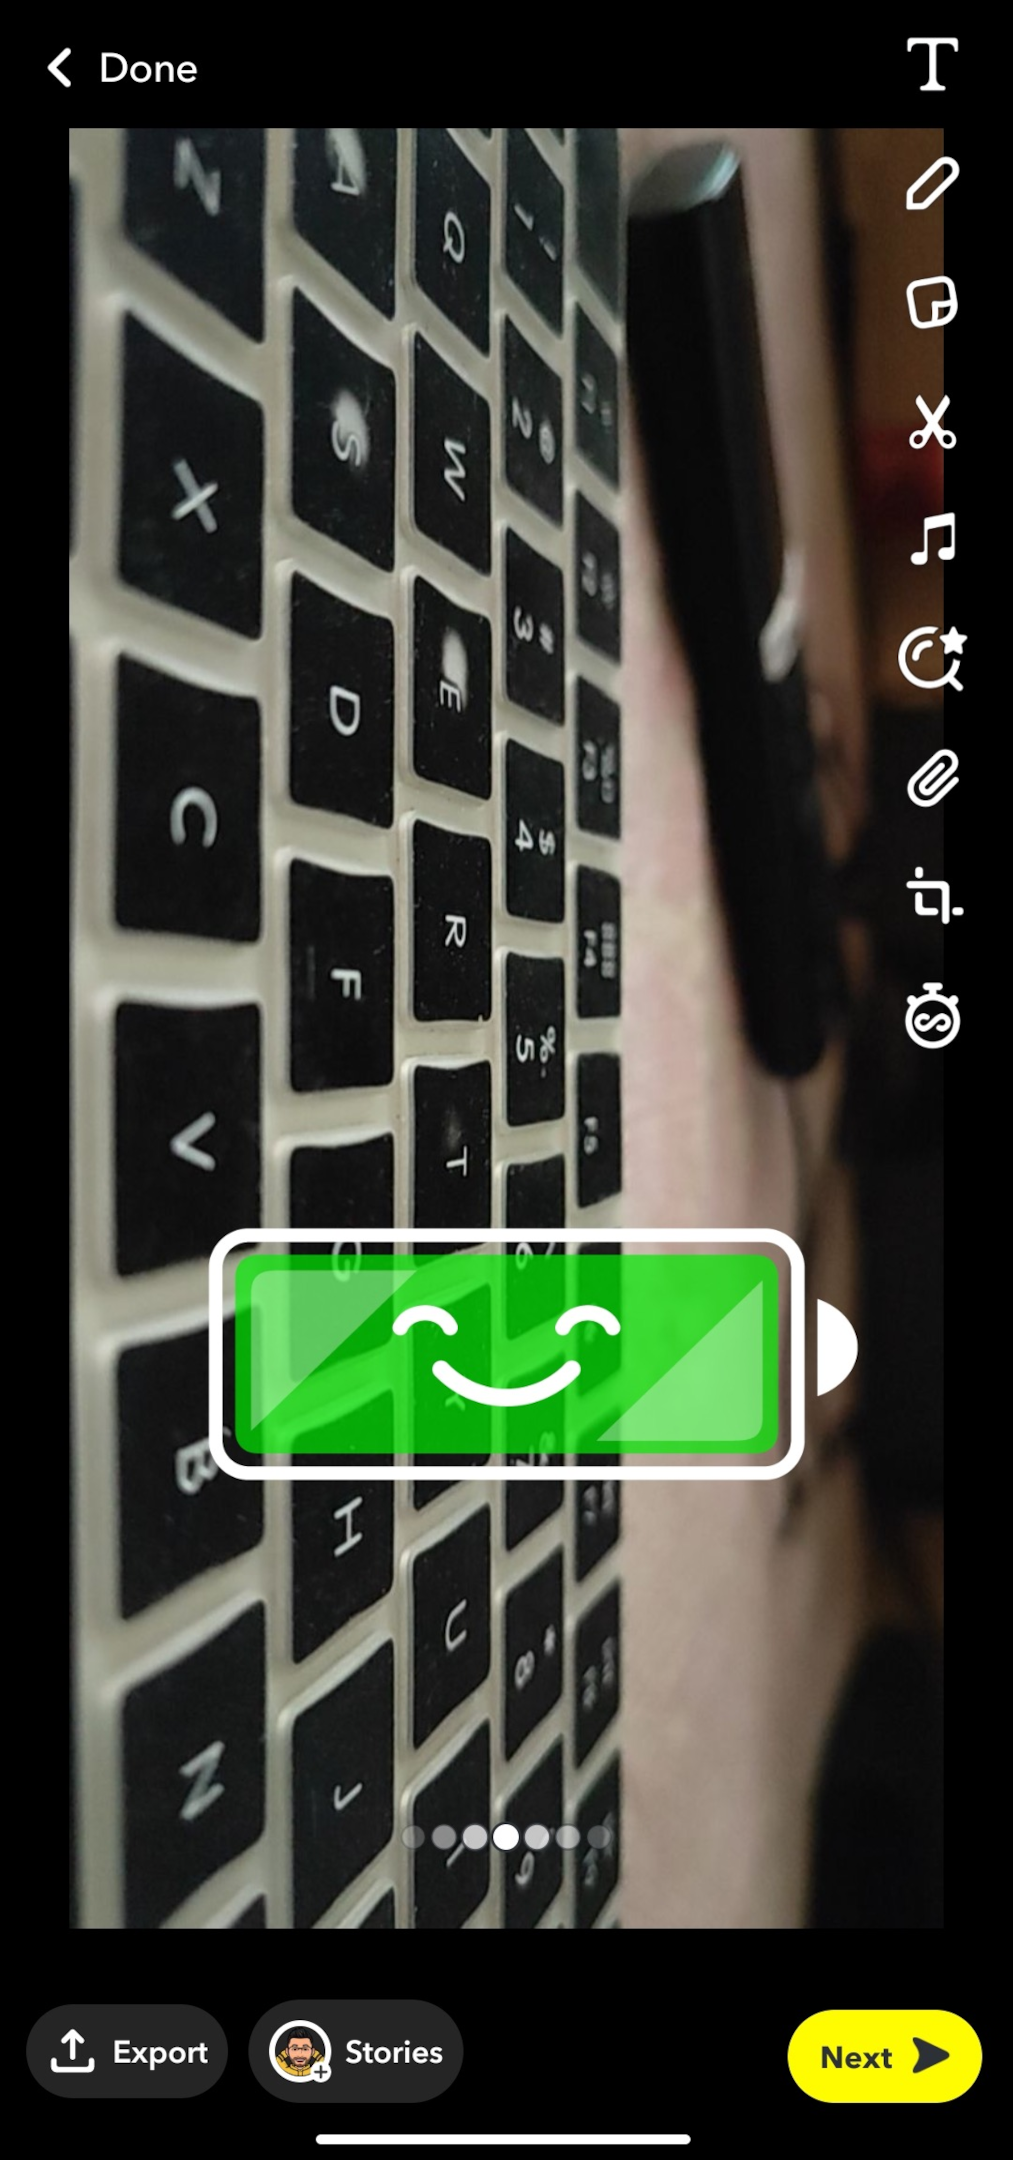 Remote.tools shows a sticker that is added to a snap